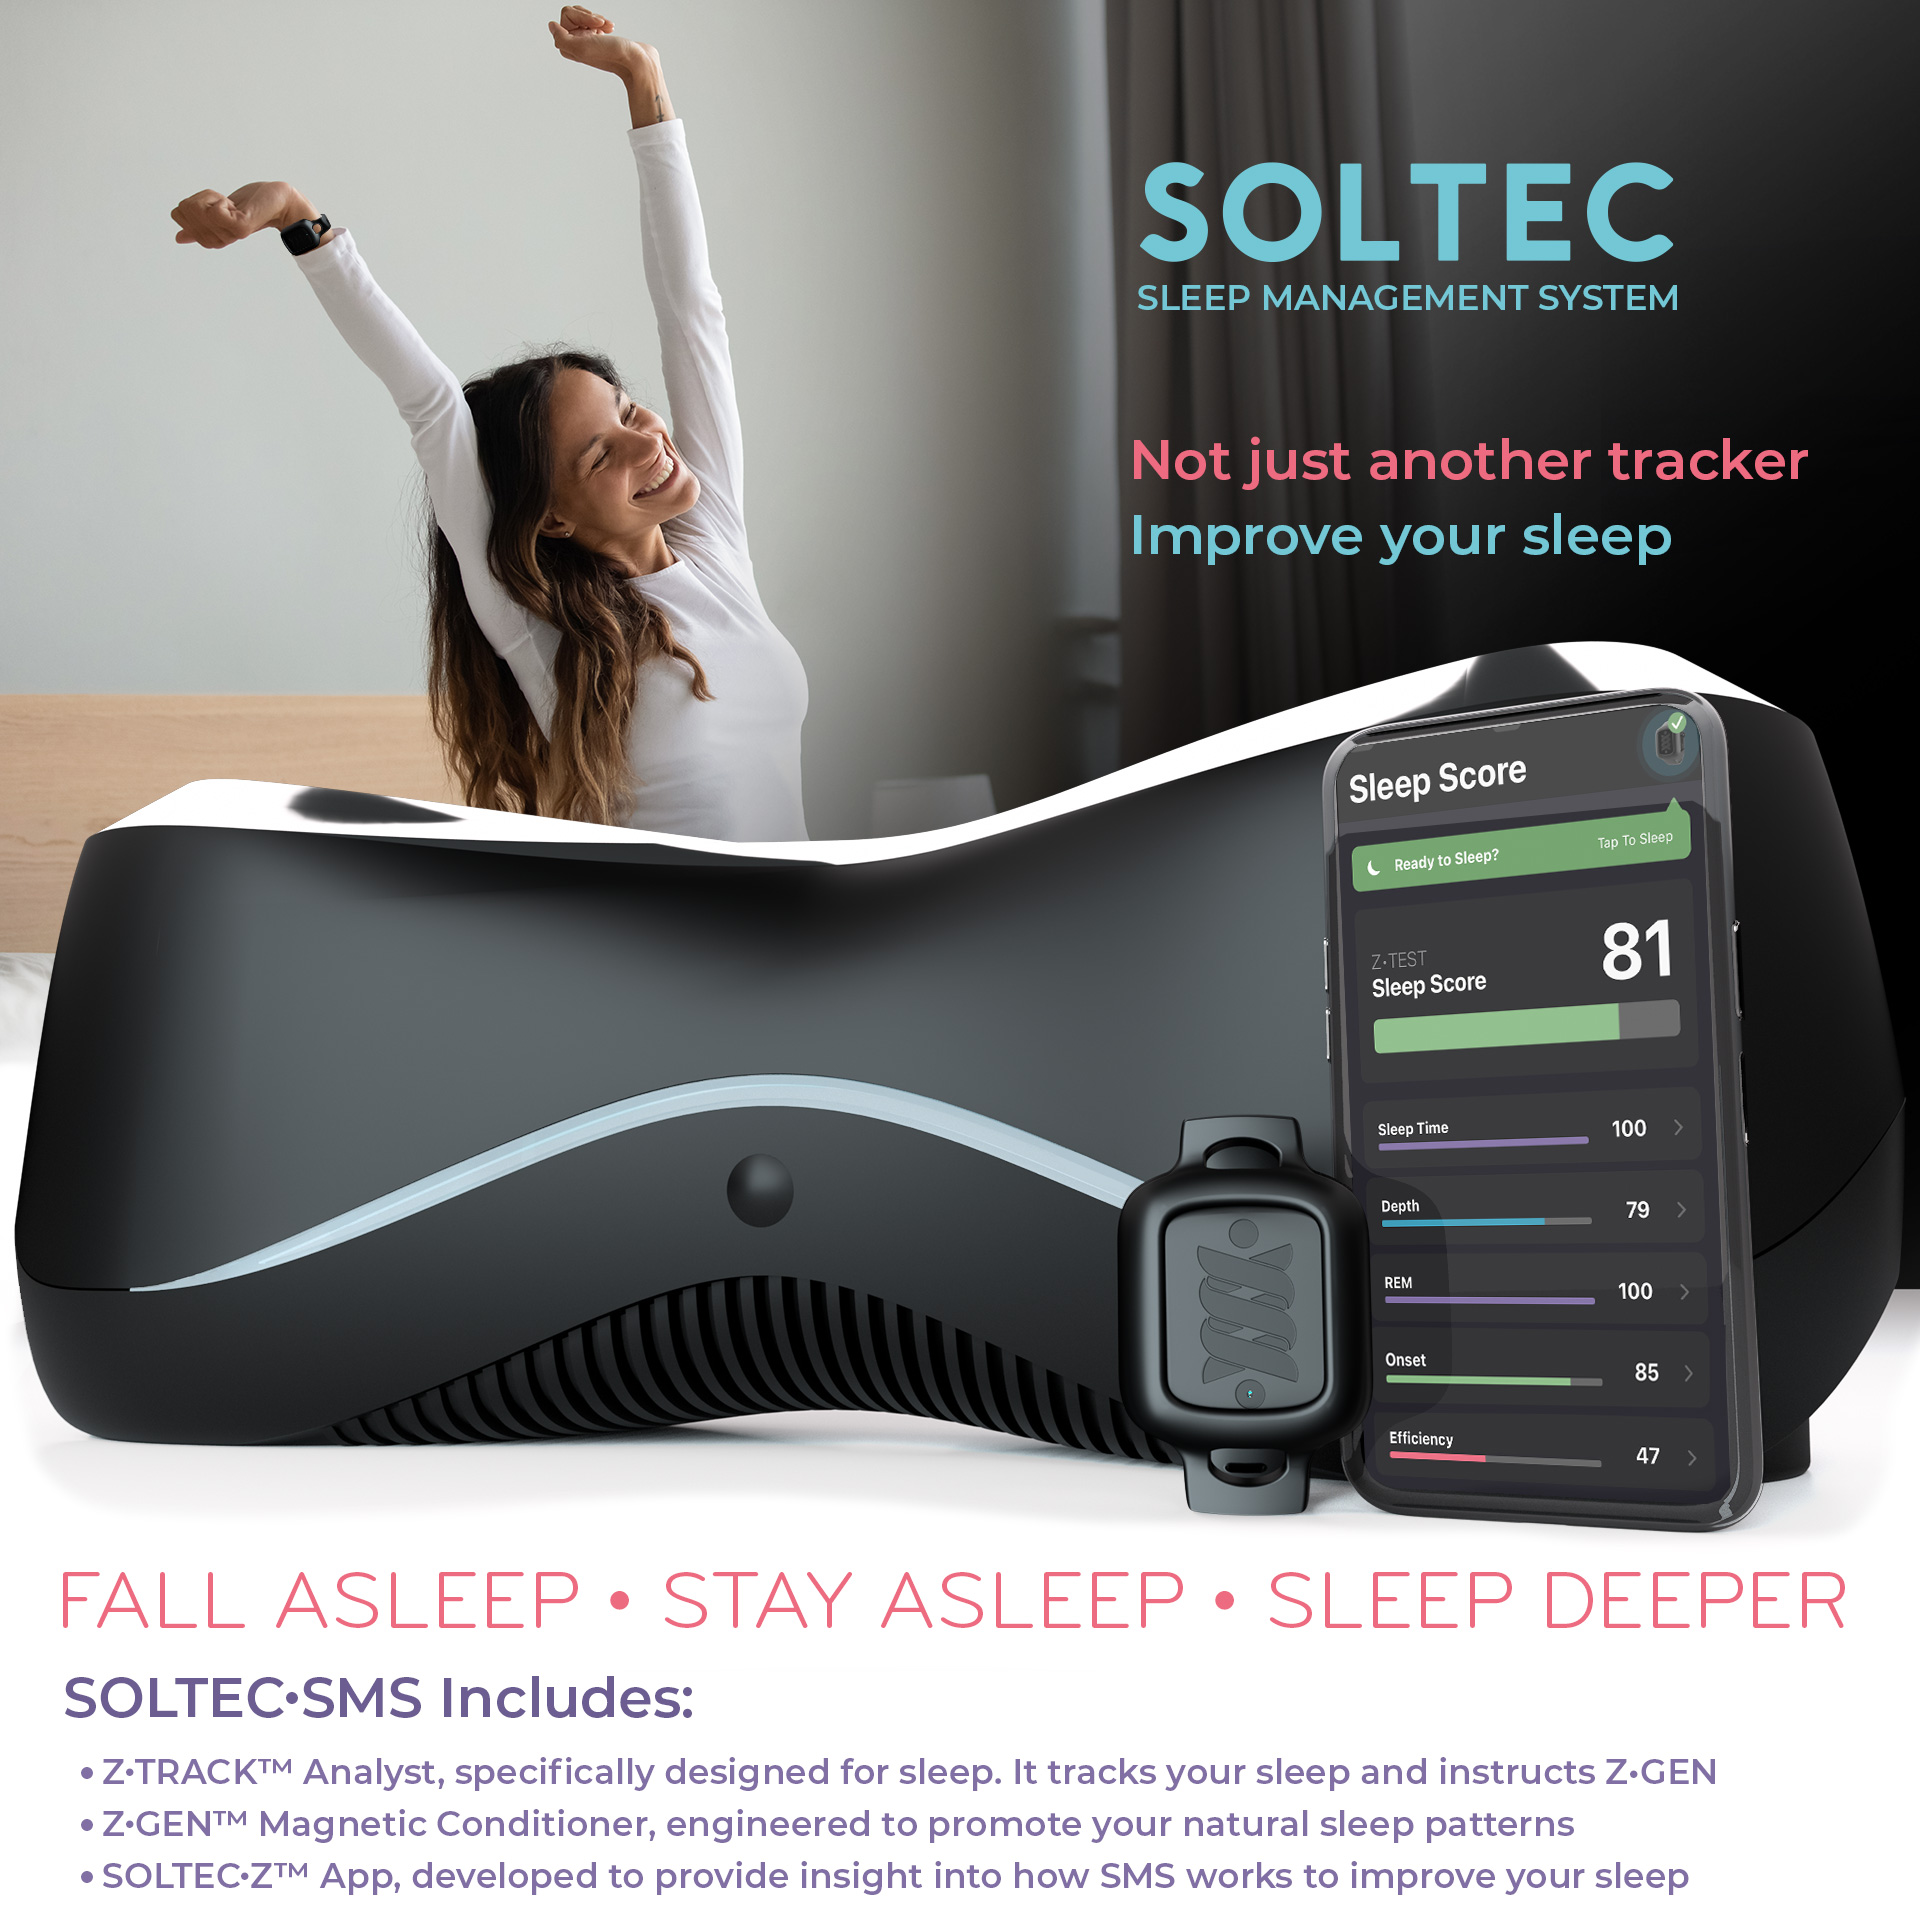 SOLTEC sleep management system not just another tracker improve your sleep